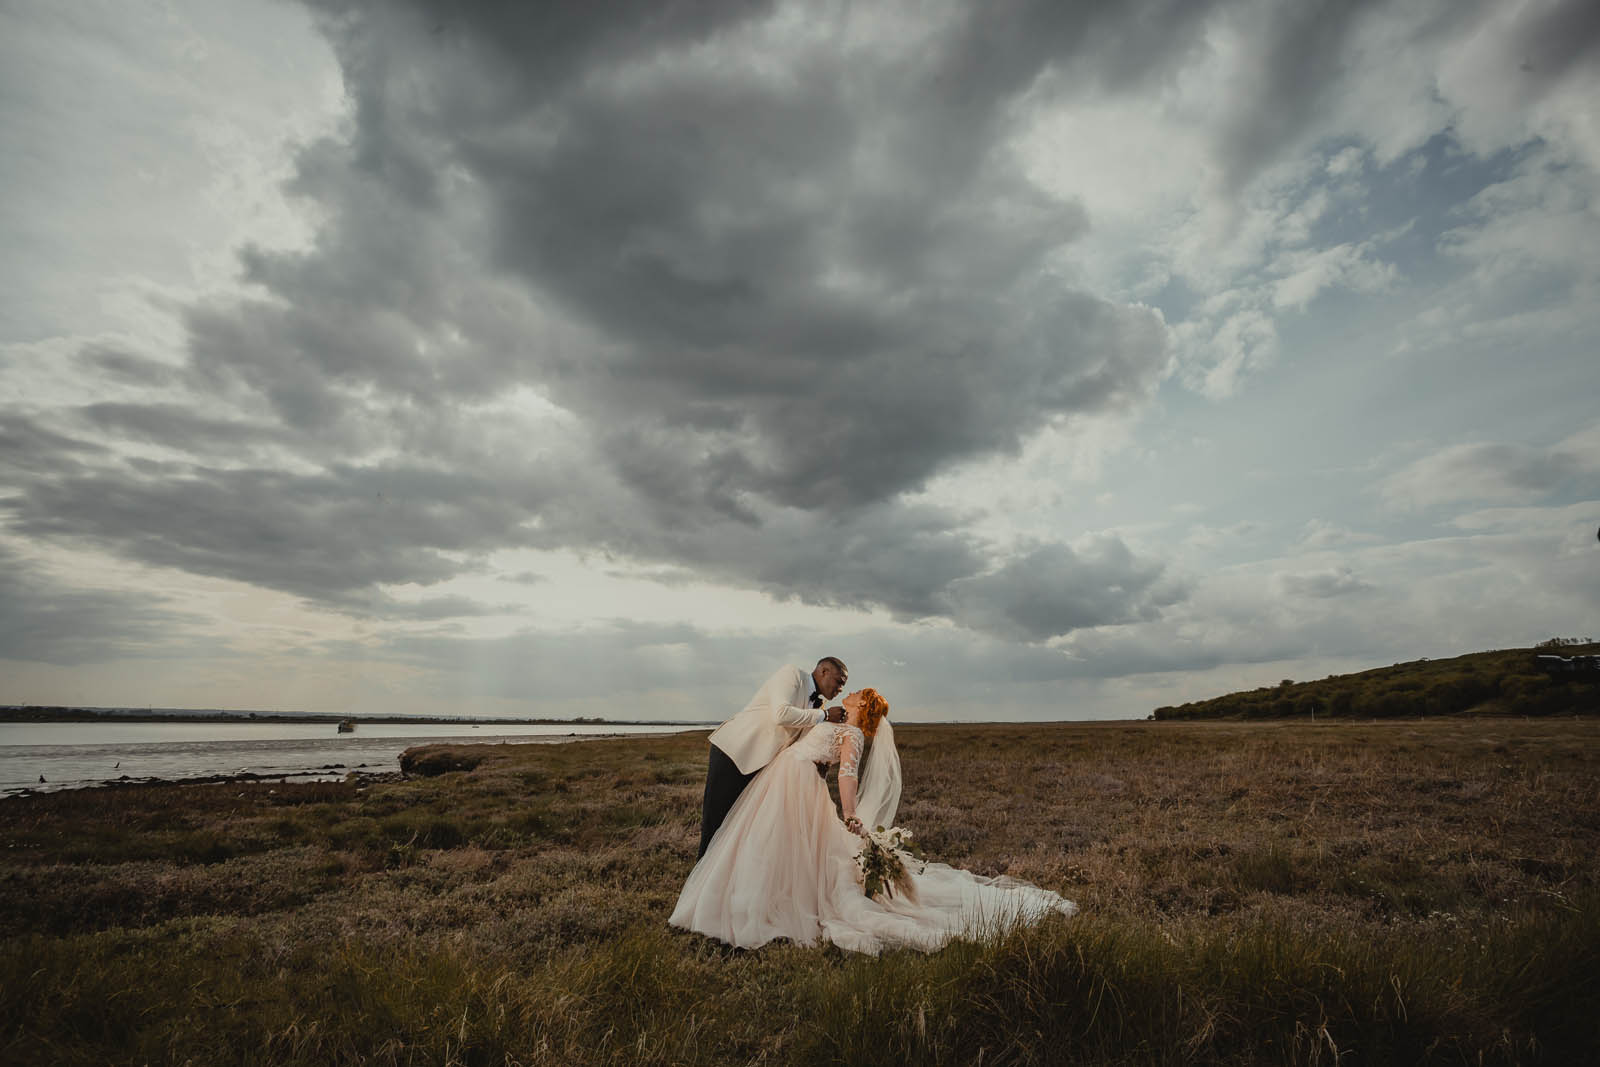 Stormy skies for a wedding photo at The Ferry House Kent